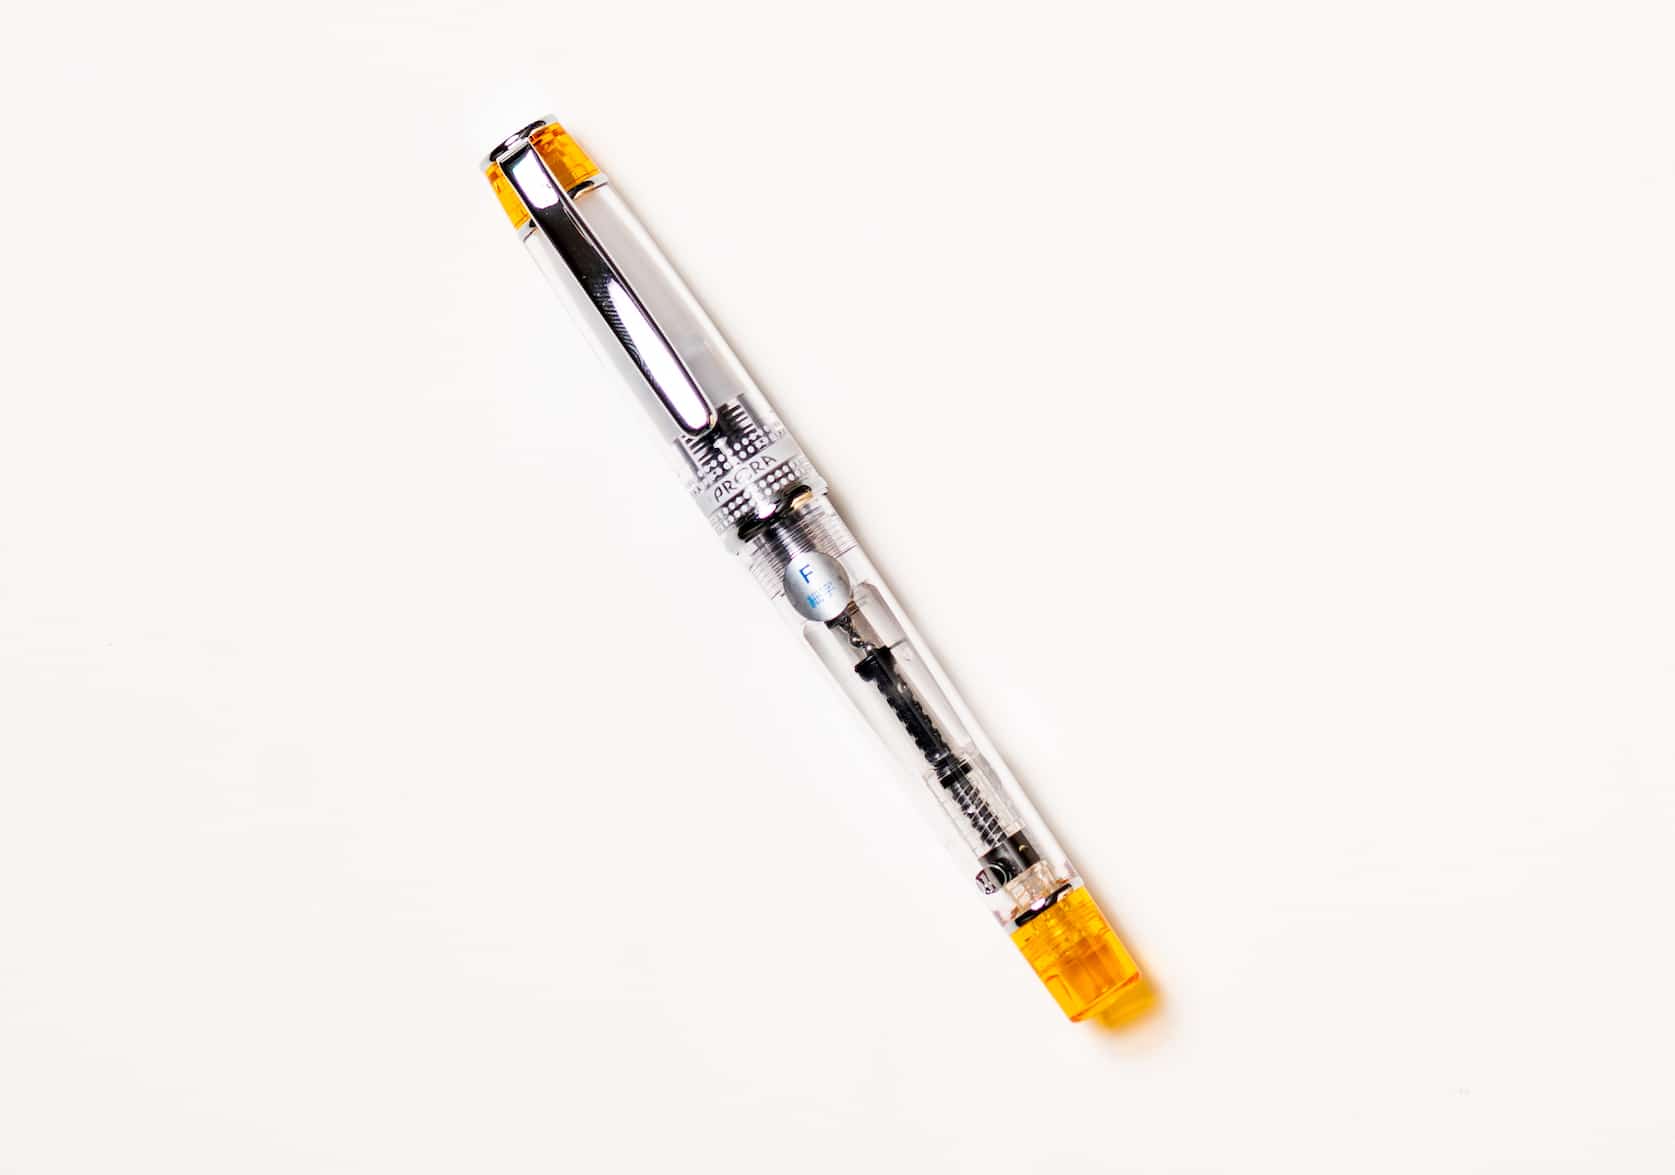 Transparent fountain pen with silver pen clip. Tinted orange details on the top of the pen cap and bottom of the barrel